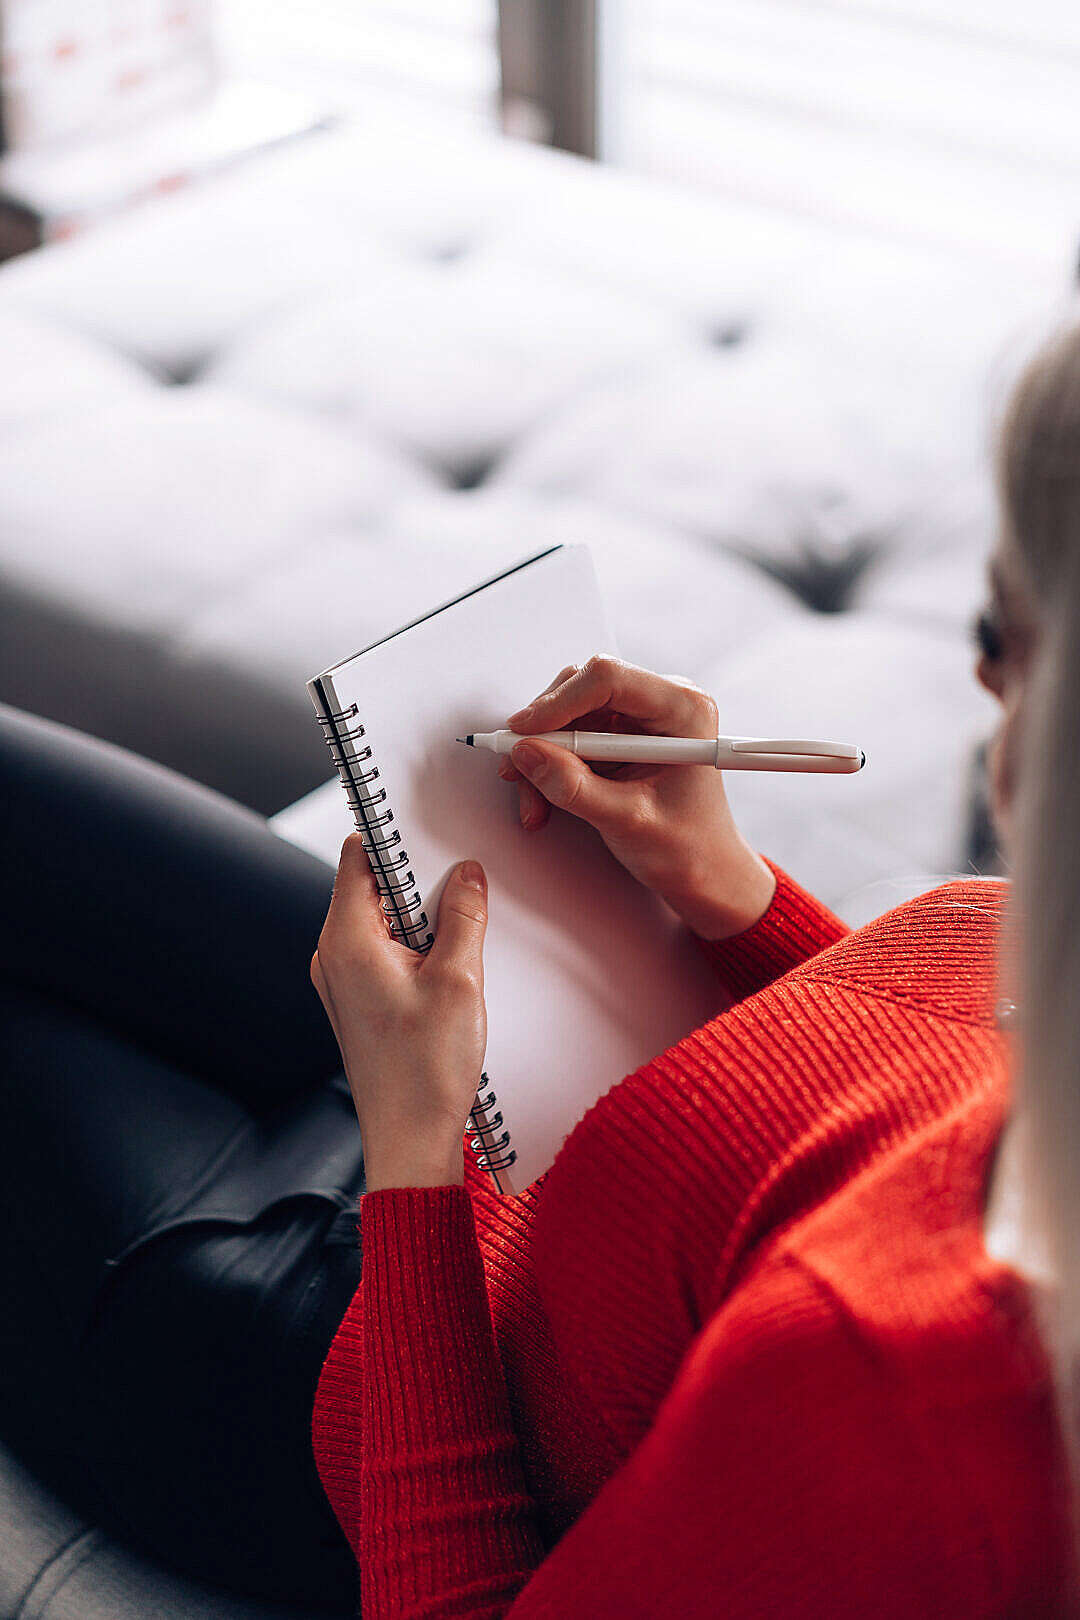 Download Woman Sitting on a Sofa and Writing in a Diary FREE Stock Photo